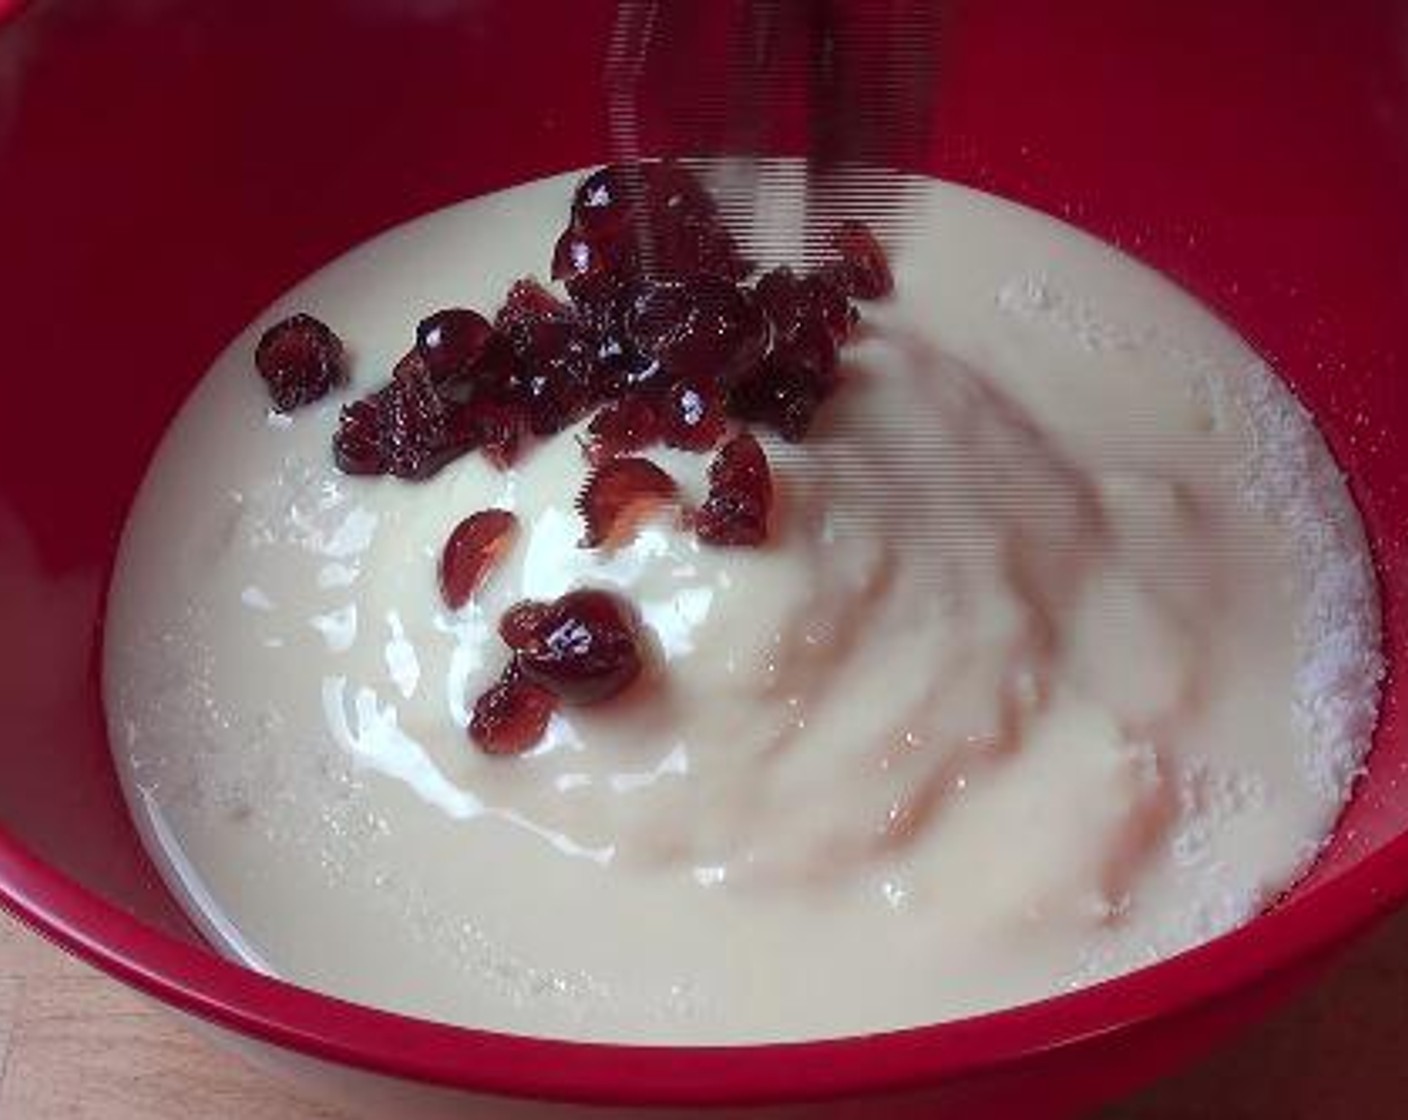 step 3 Add Unsweetened Shredded Coconut (4 cups), Sweetened Condensed Milk (1 1/3 cups), Glace Cherry (1 cup) cut into quarters and White Chocolate (3/4 cup). Add a couple of drops of Pink Food Coloring (to taste) and mix well.